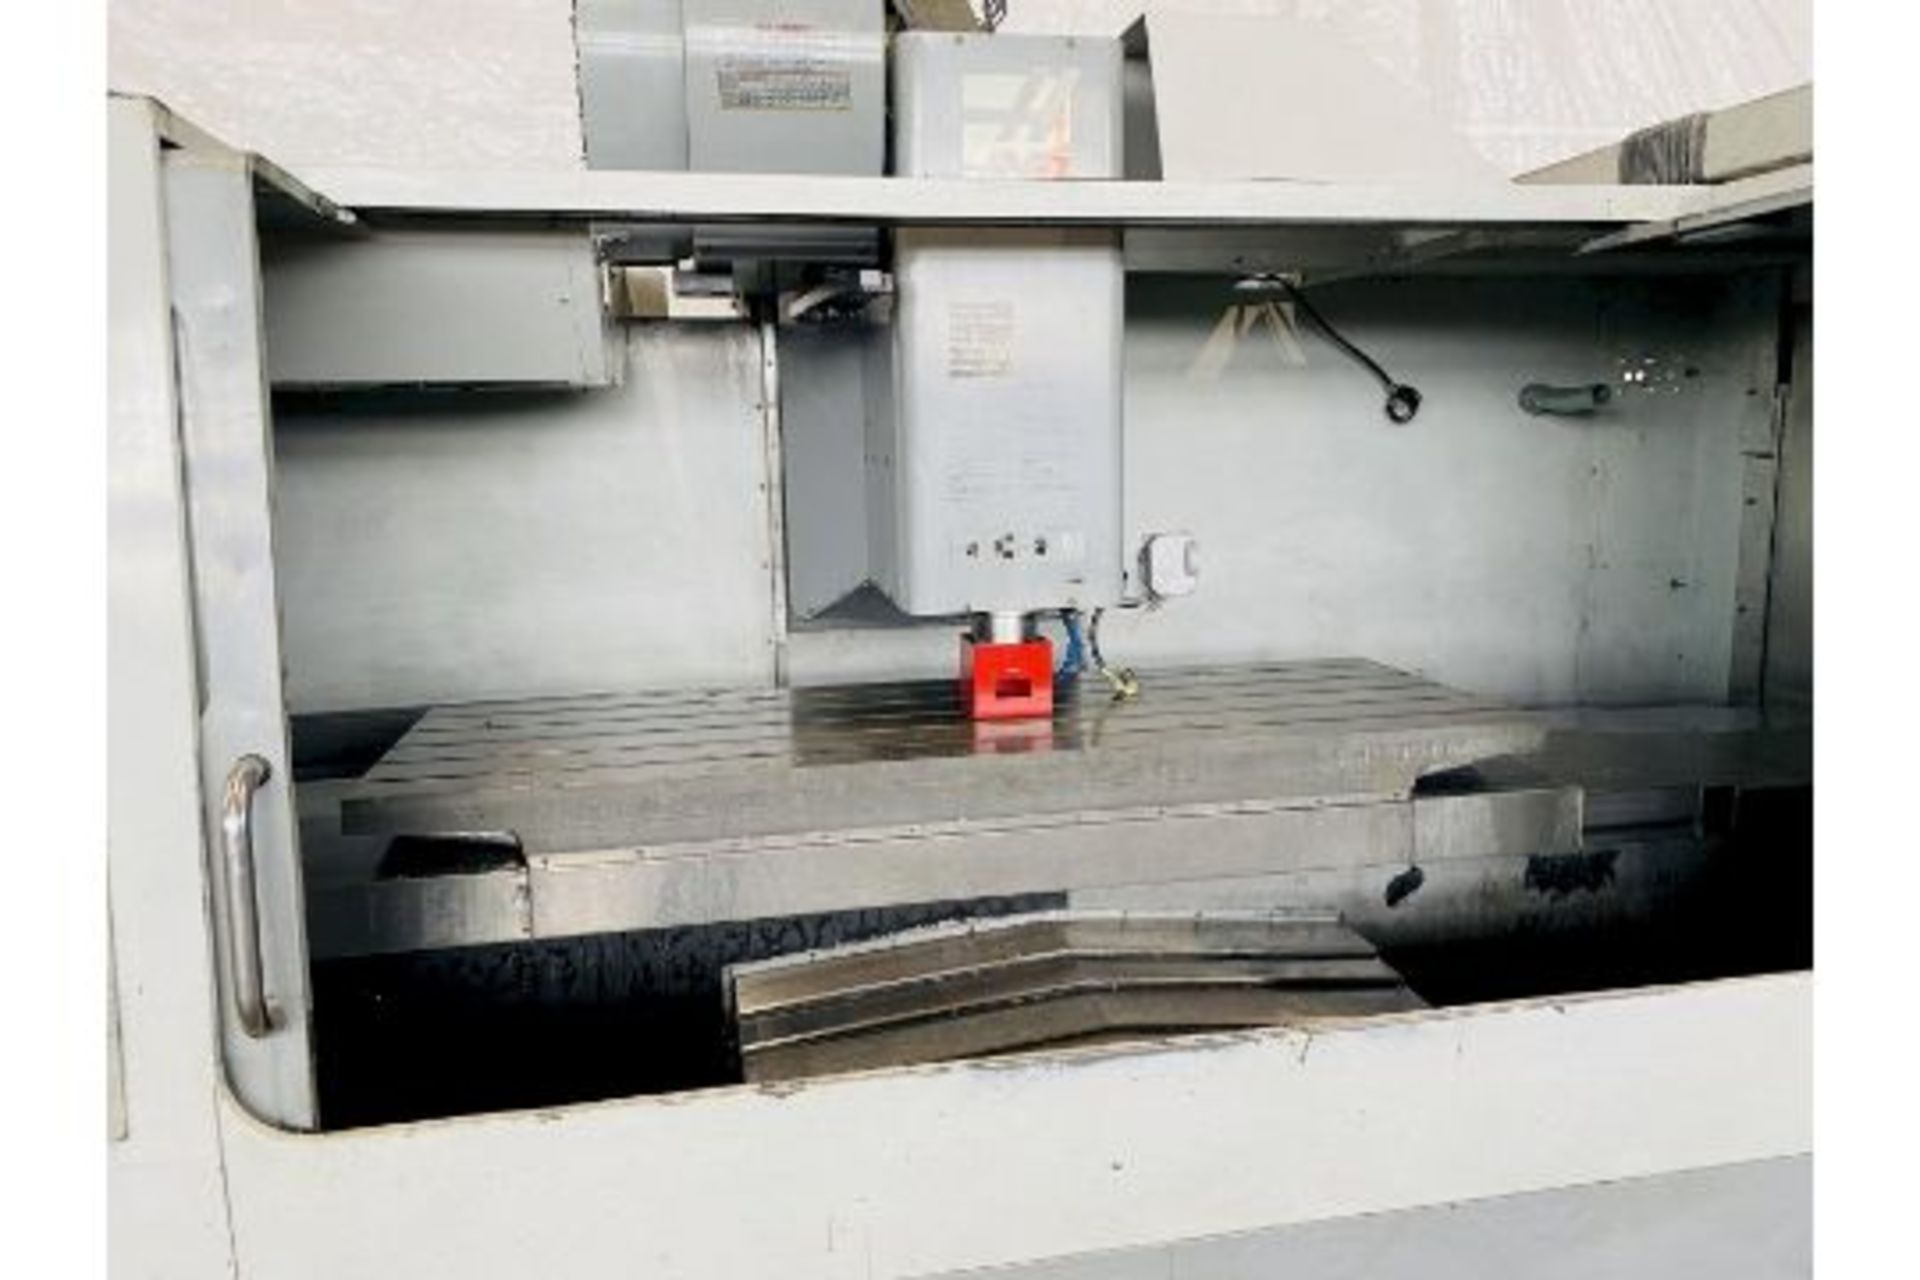 (2006) HAAS VF-7D/40 CNC VERTICAL MACHINING CENTER - Image 4 of 15